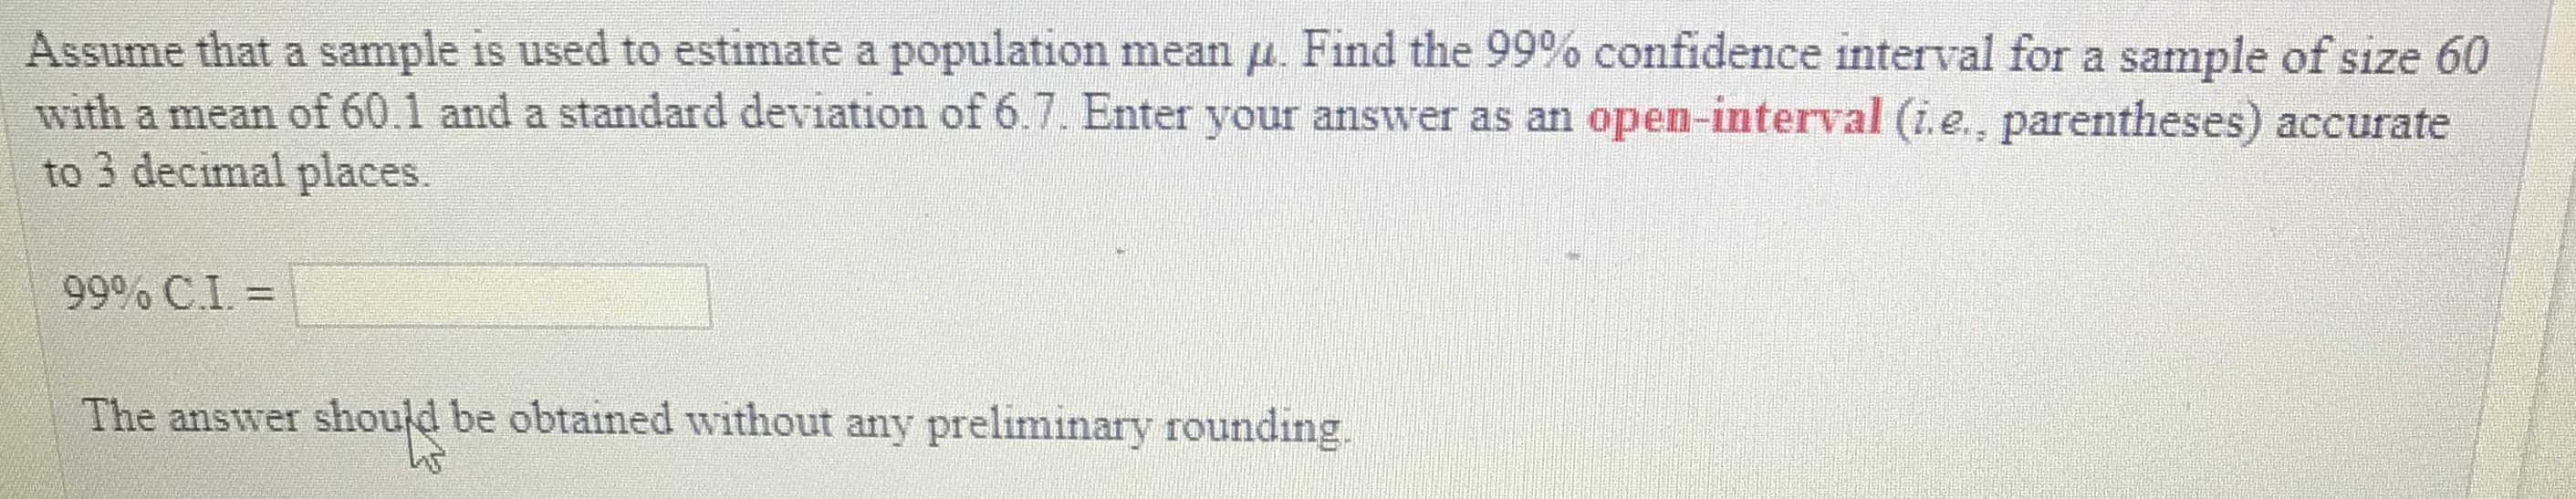 Assume that a sample is used to estimate a population mean μ Find the 99% confidence interval for a sample ofsıze 60
with a mean of 60.1 and a standard deviation of 6.7. Enter your answer as an open-interval (i.e., parentheses) accurate
to 3 decimal places.
99% CI =
he answer should be obtained without any preliminary rounding,
